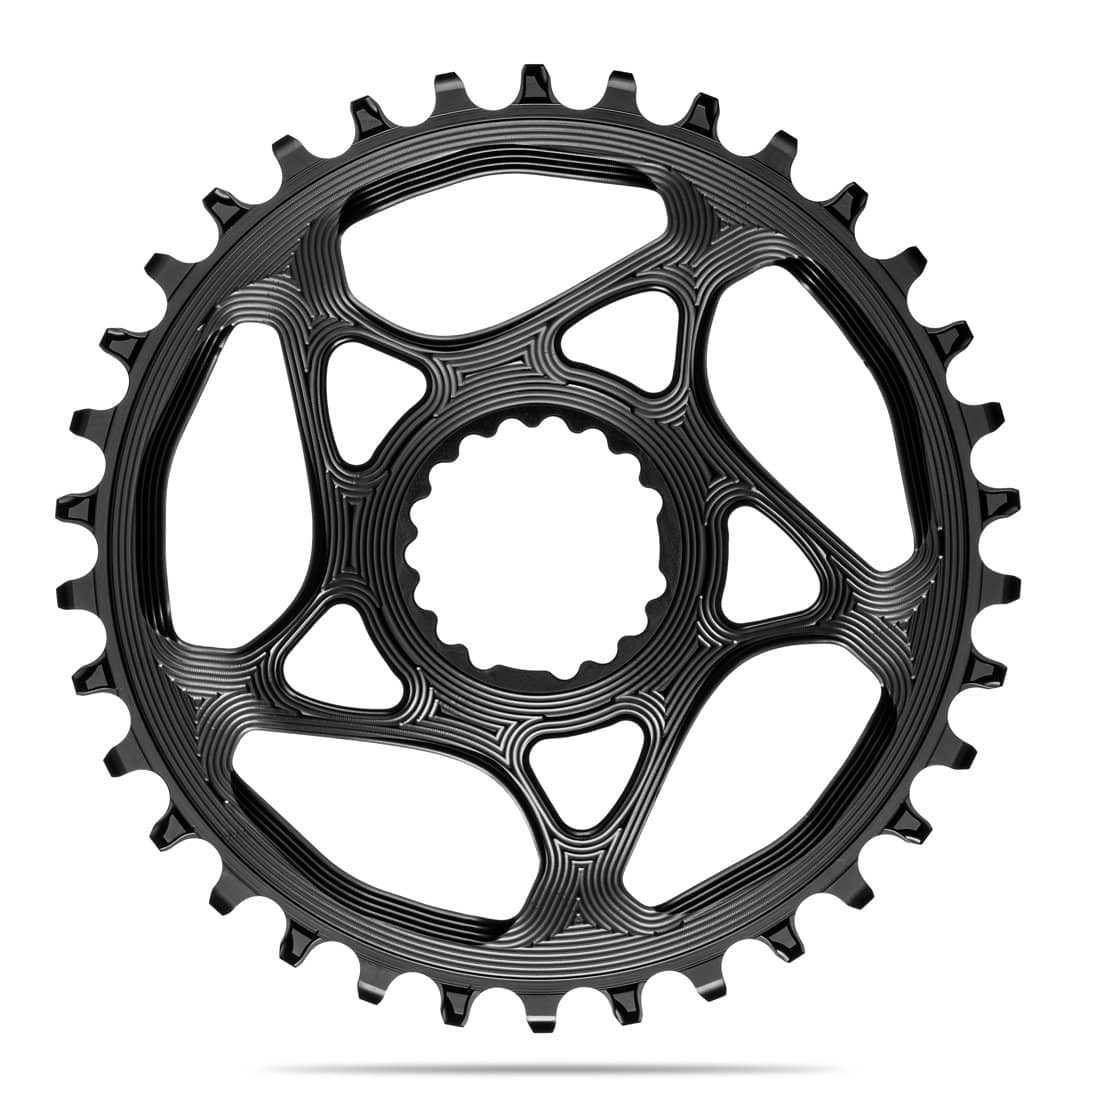 absoluteblack narrow wide direct mount chainring for Cannondale hollowgram sisl fsi